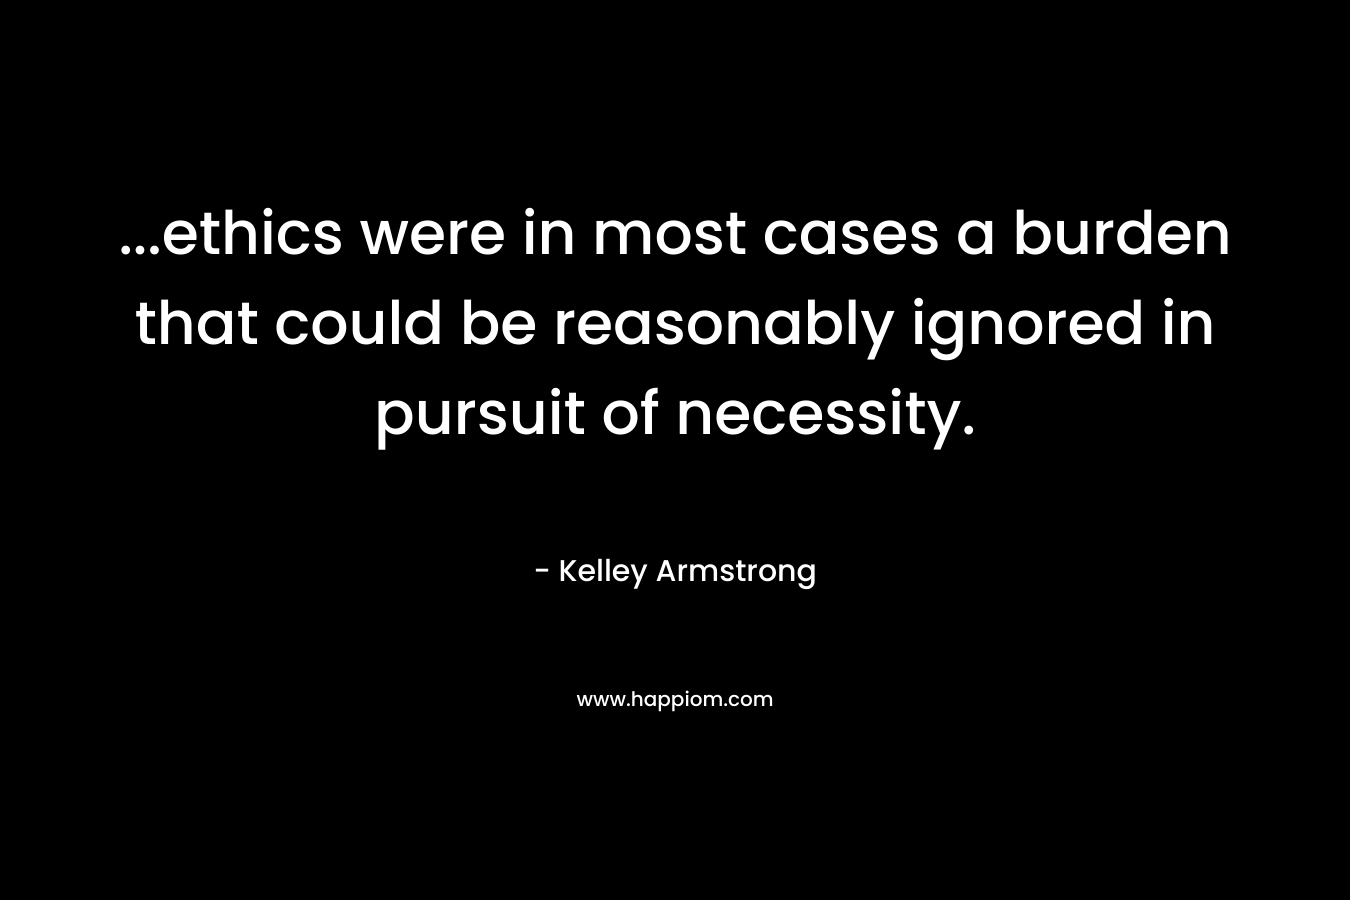 …ethics were in most cases a burden that could be reasonably ignored in pursuit of necessity. – Kelley Armstrong